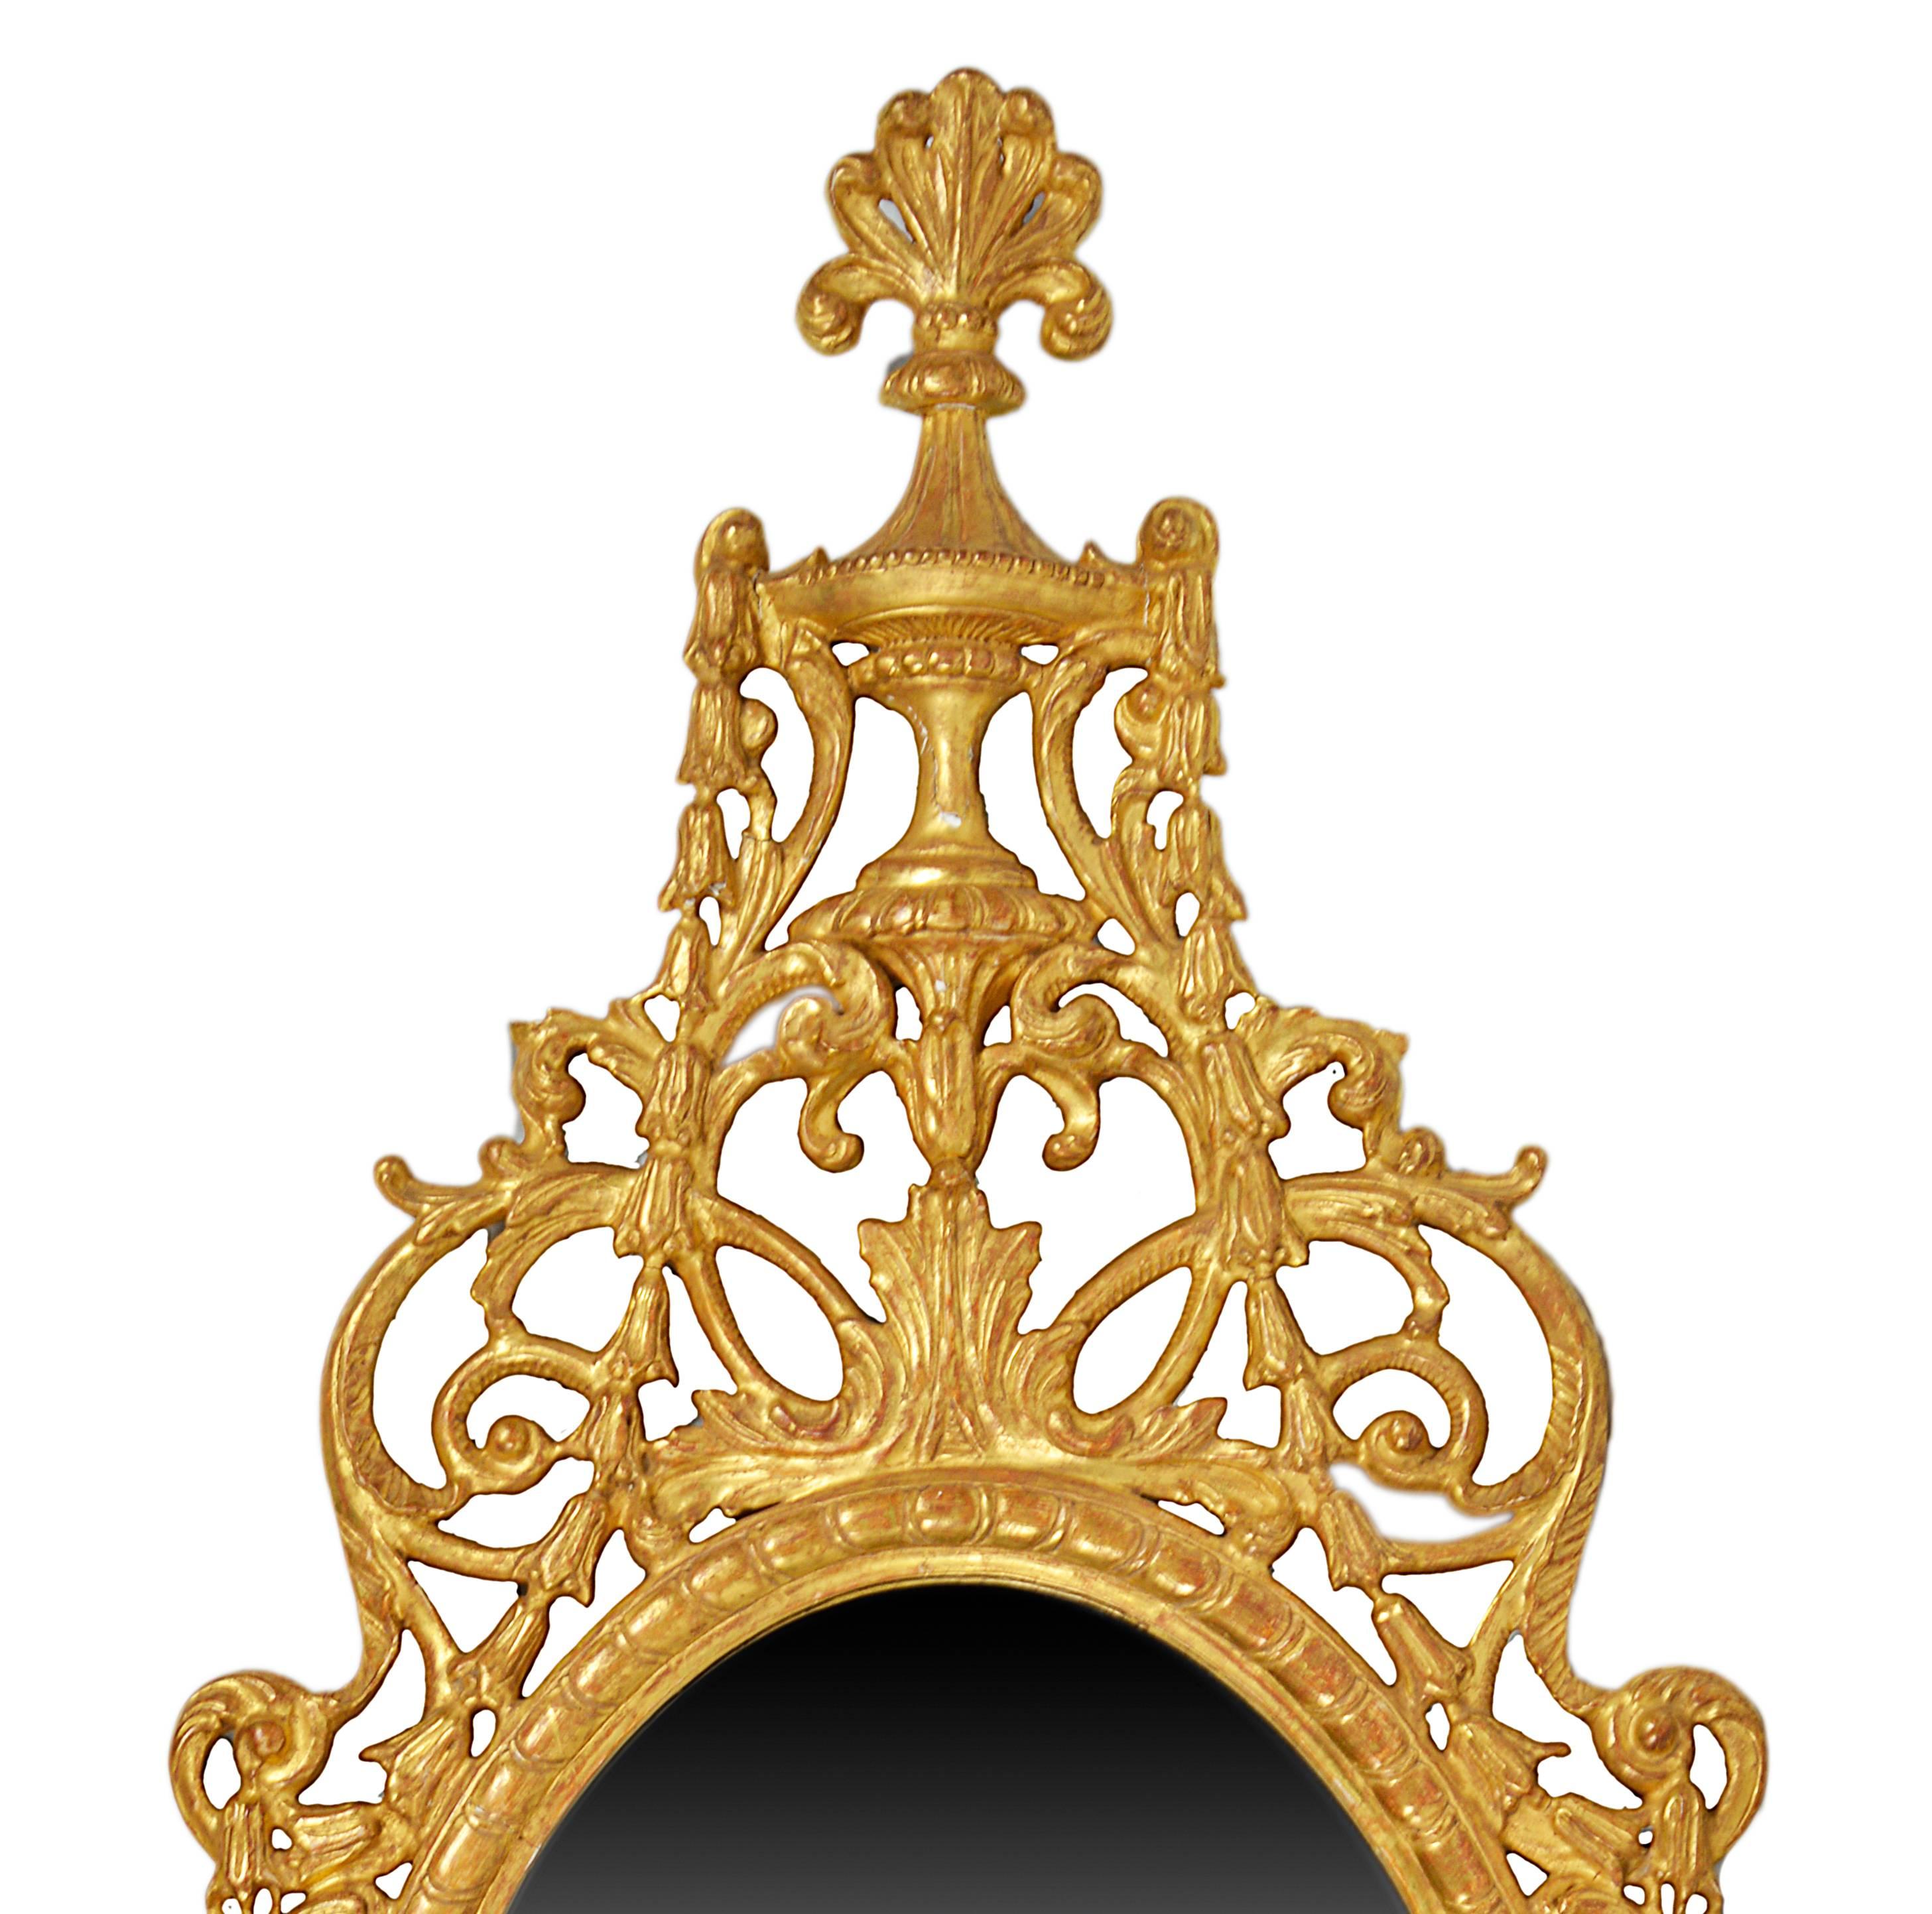 A good quality 18th century style carved giltwood Pier glass mirror, having Adam influences carved giltwood swags, drapes and scrolls.